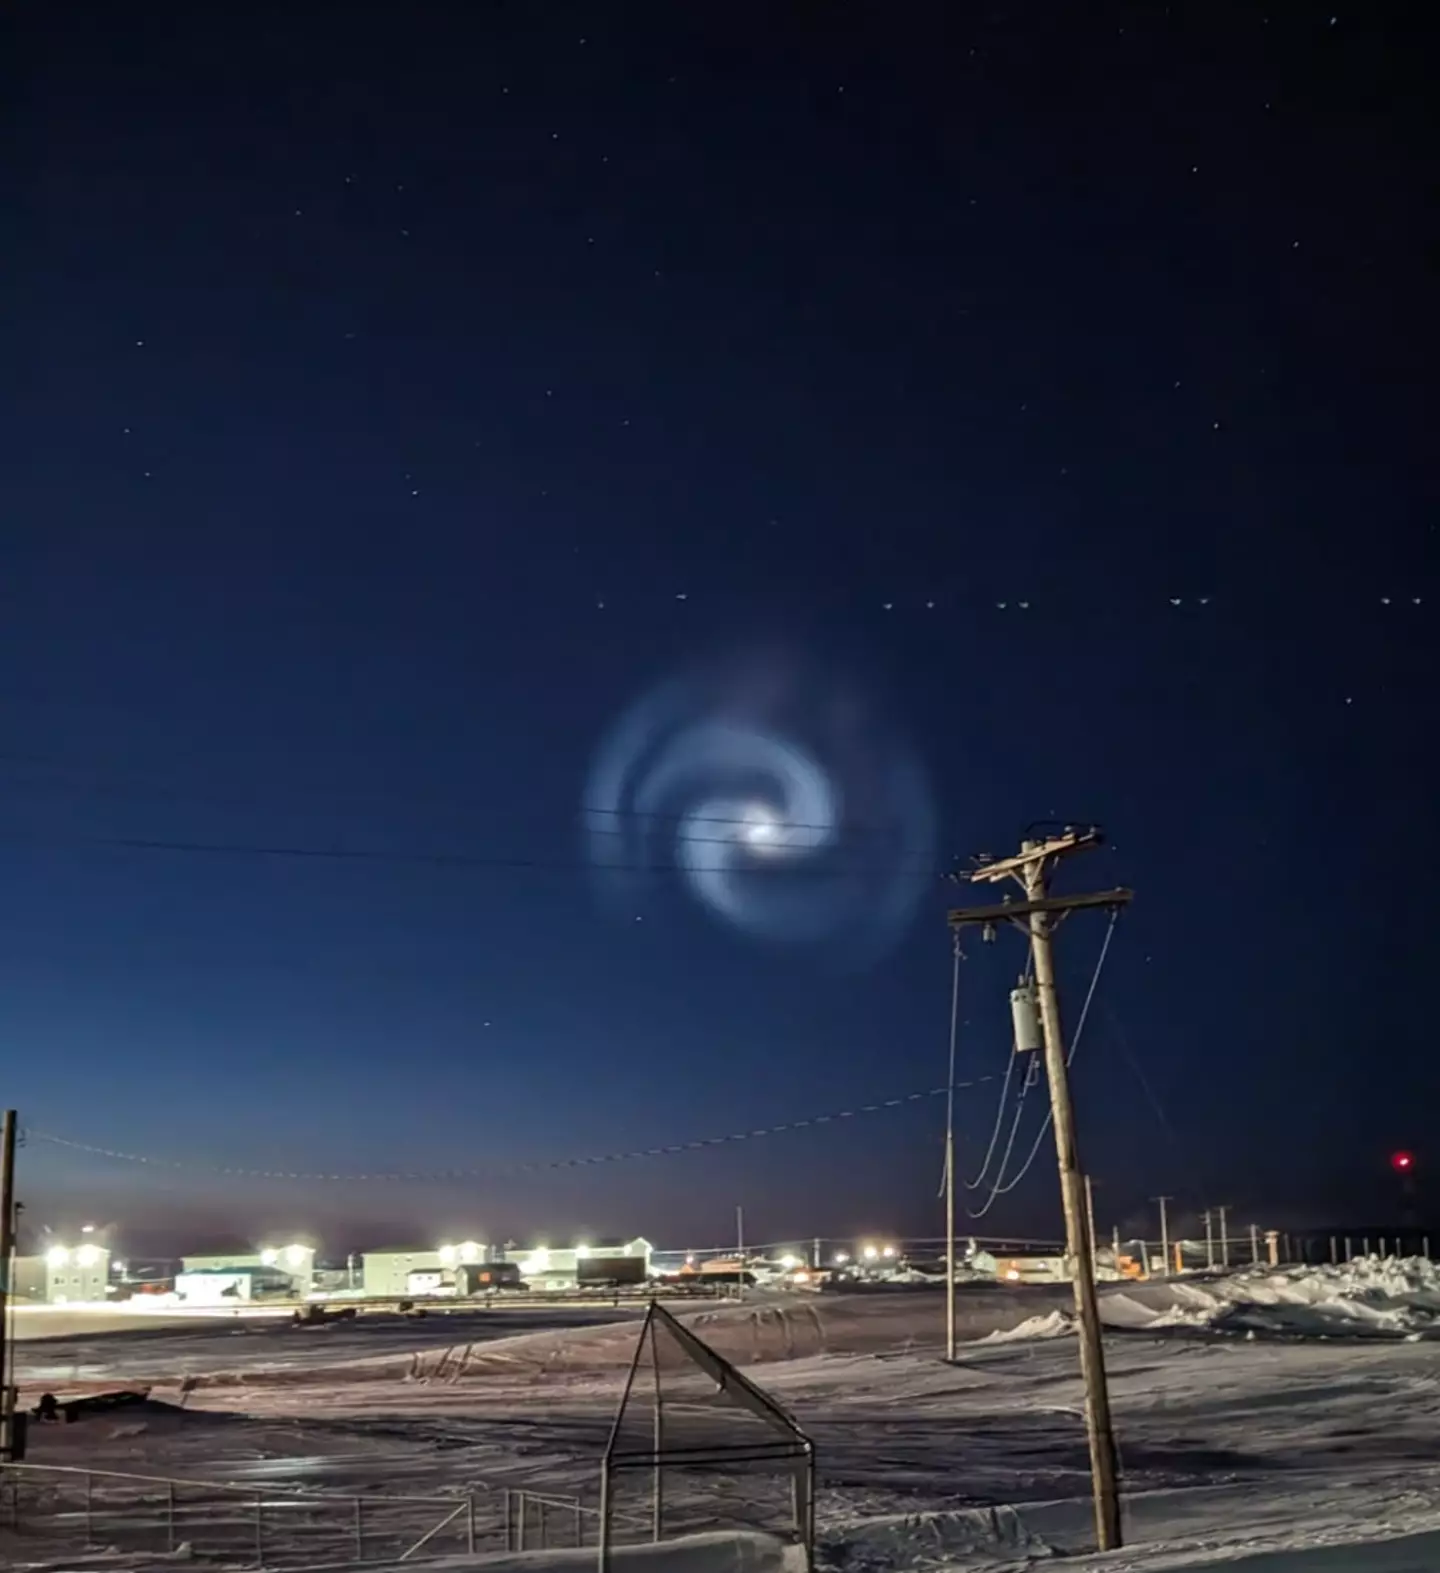 A mysterious giant spiral has left people in search of catching a glimpse at the famed northern lights utterly baffled.